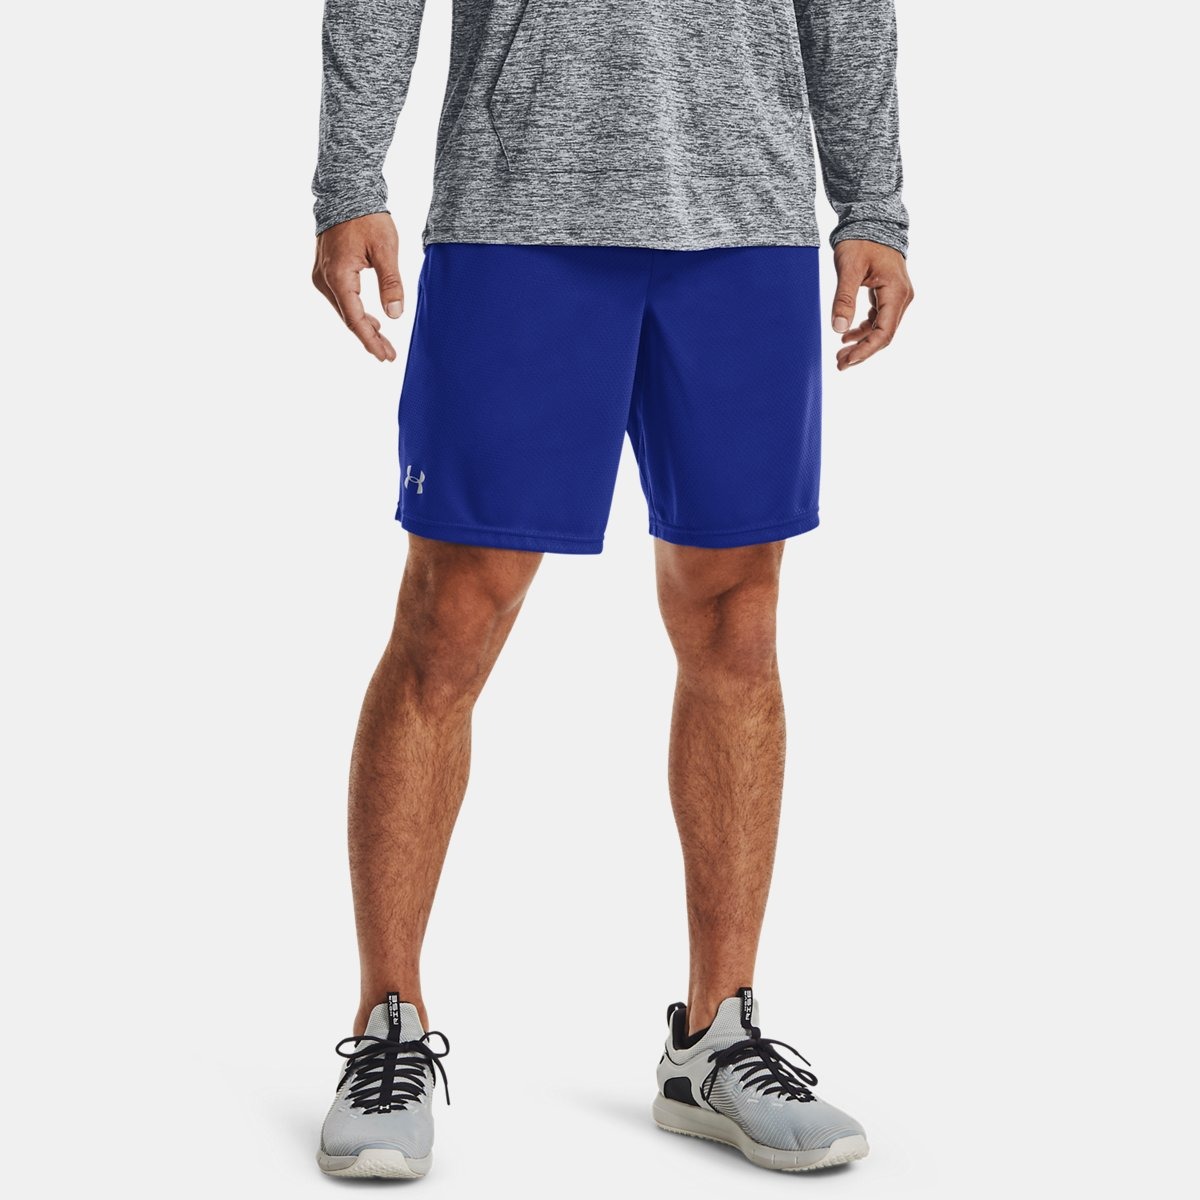 Shorts in Blue for Man from Under Armour GOOFASH